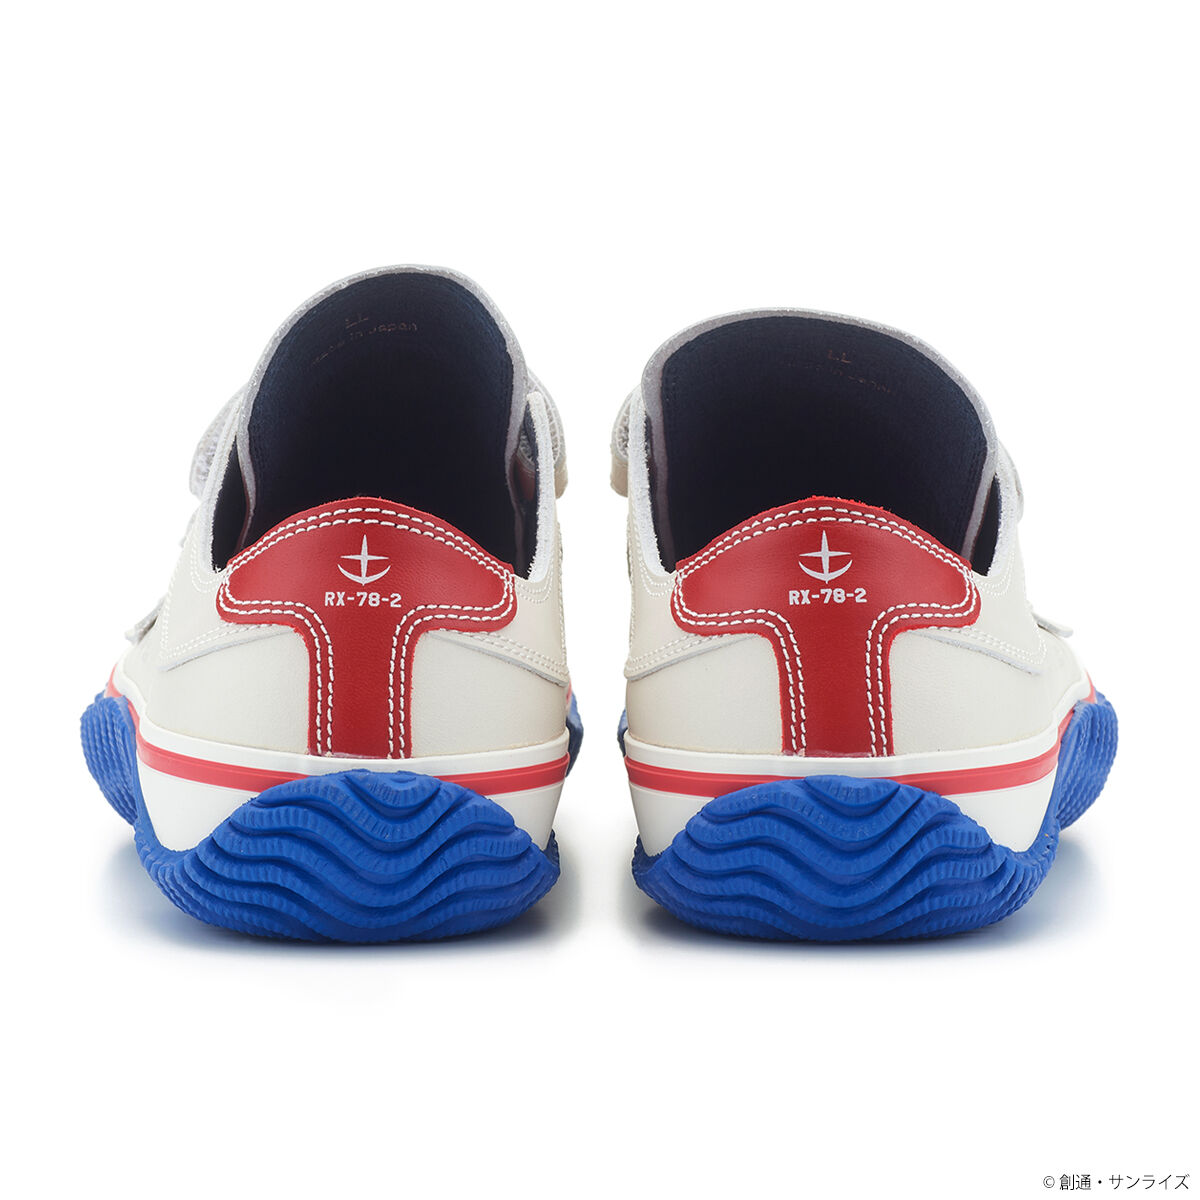 STRICT-G x SPINGLE MOVE Mobile Suit Gundam RX-78-2 Sneakers